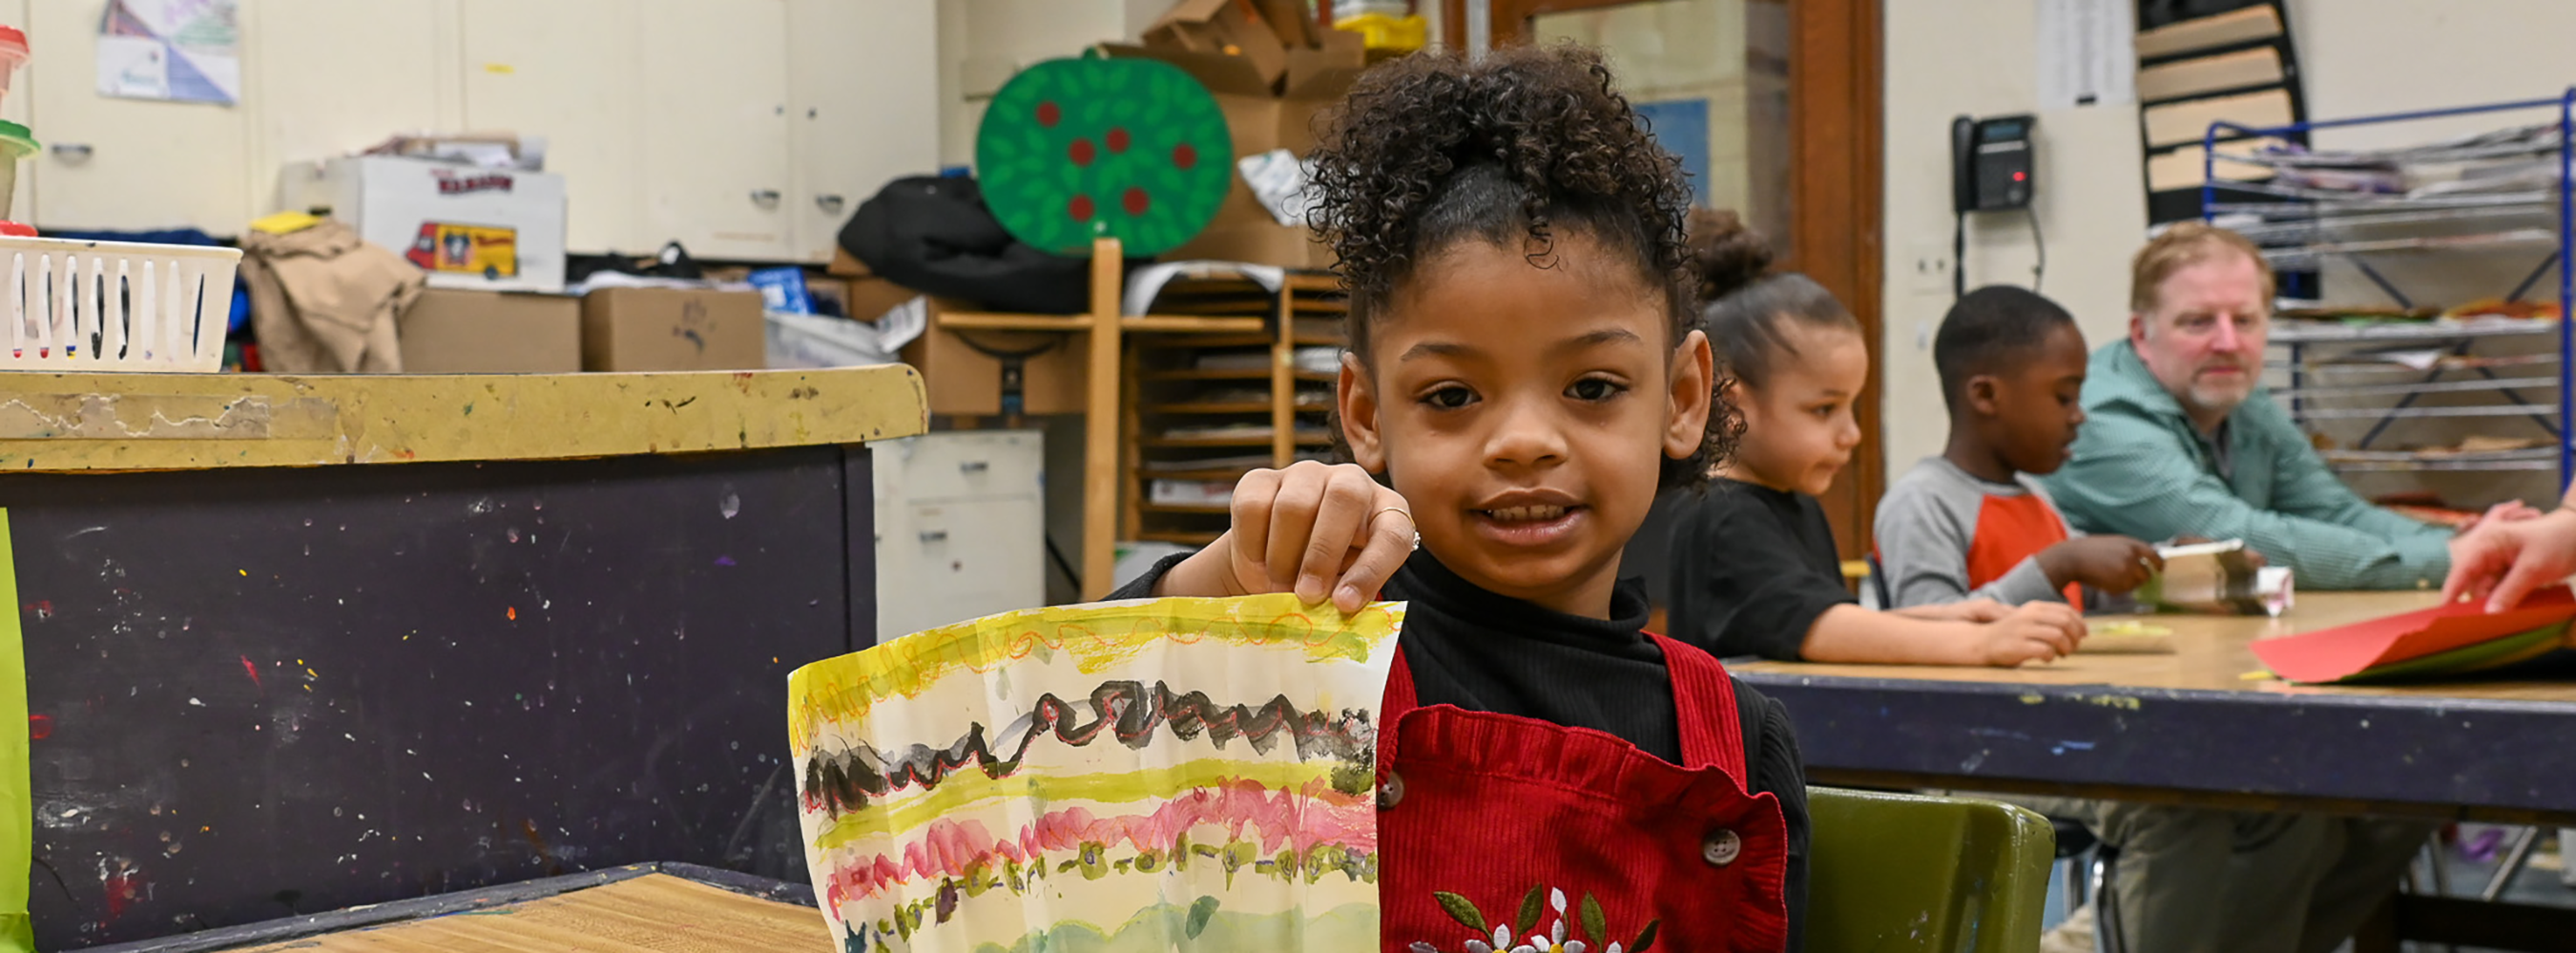 A student shows her art project to the camera